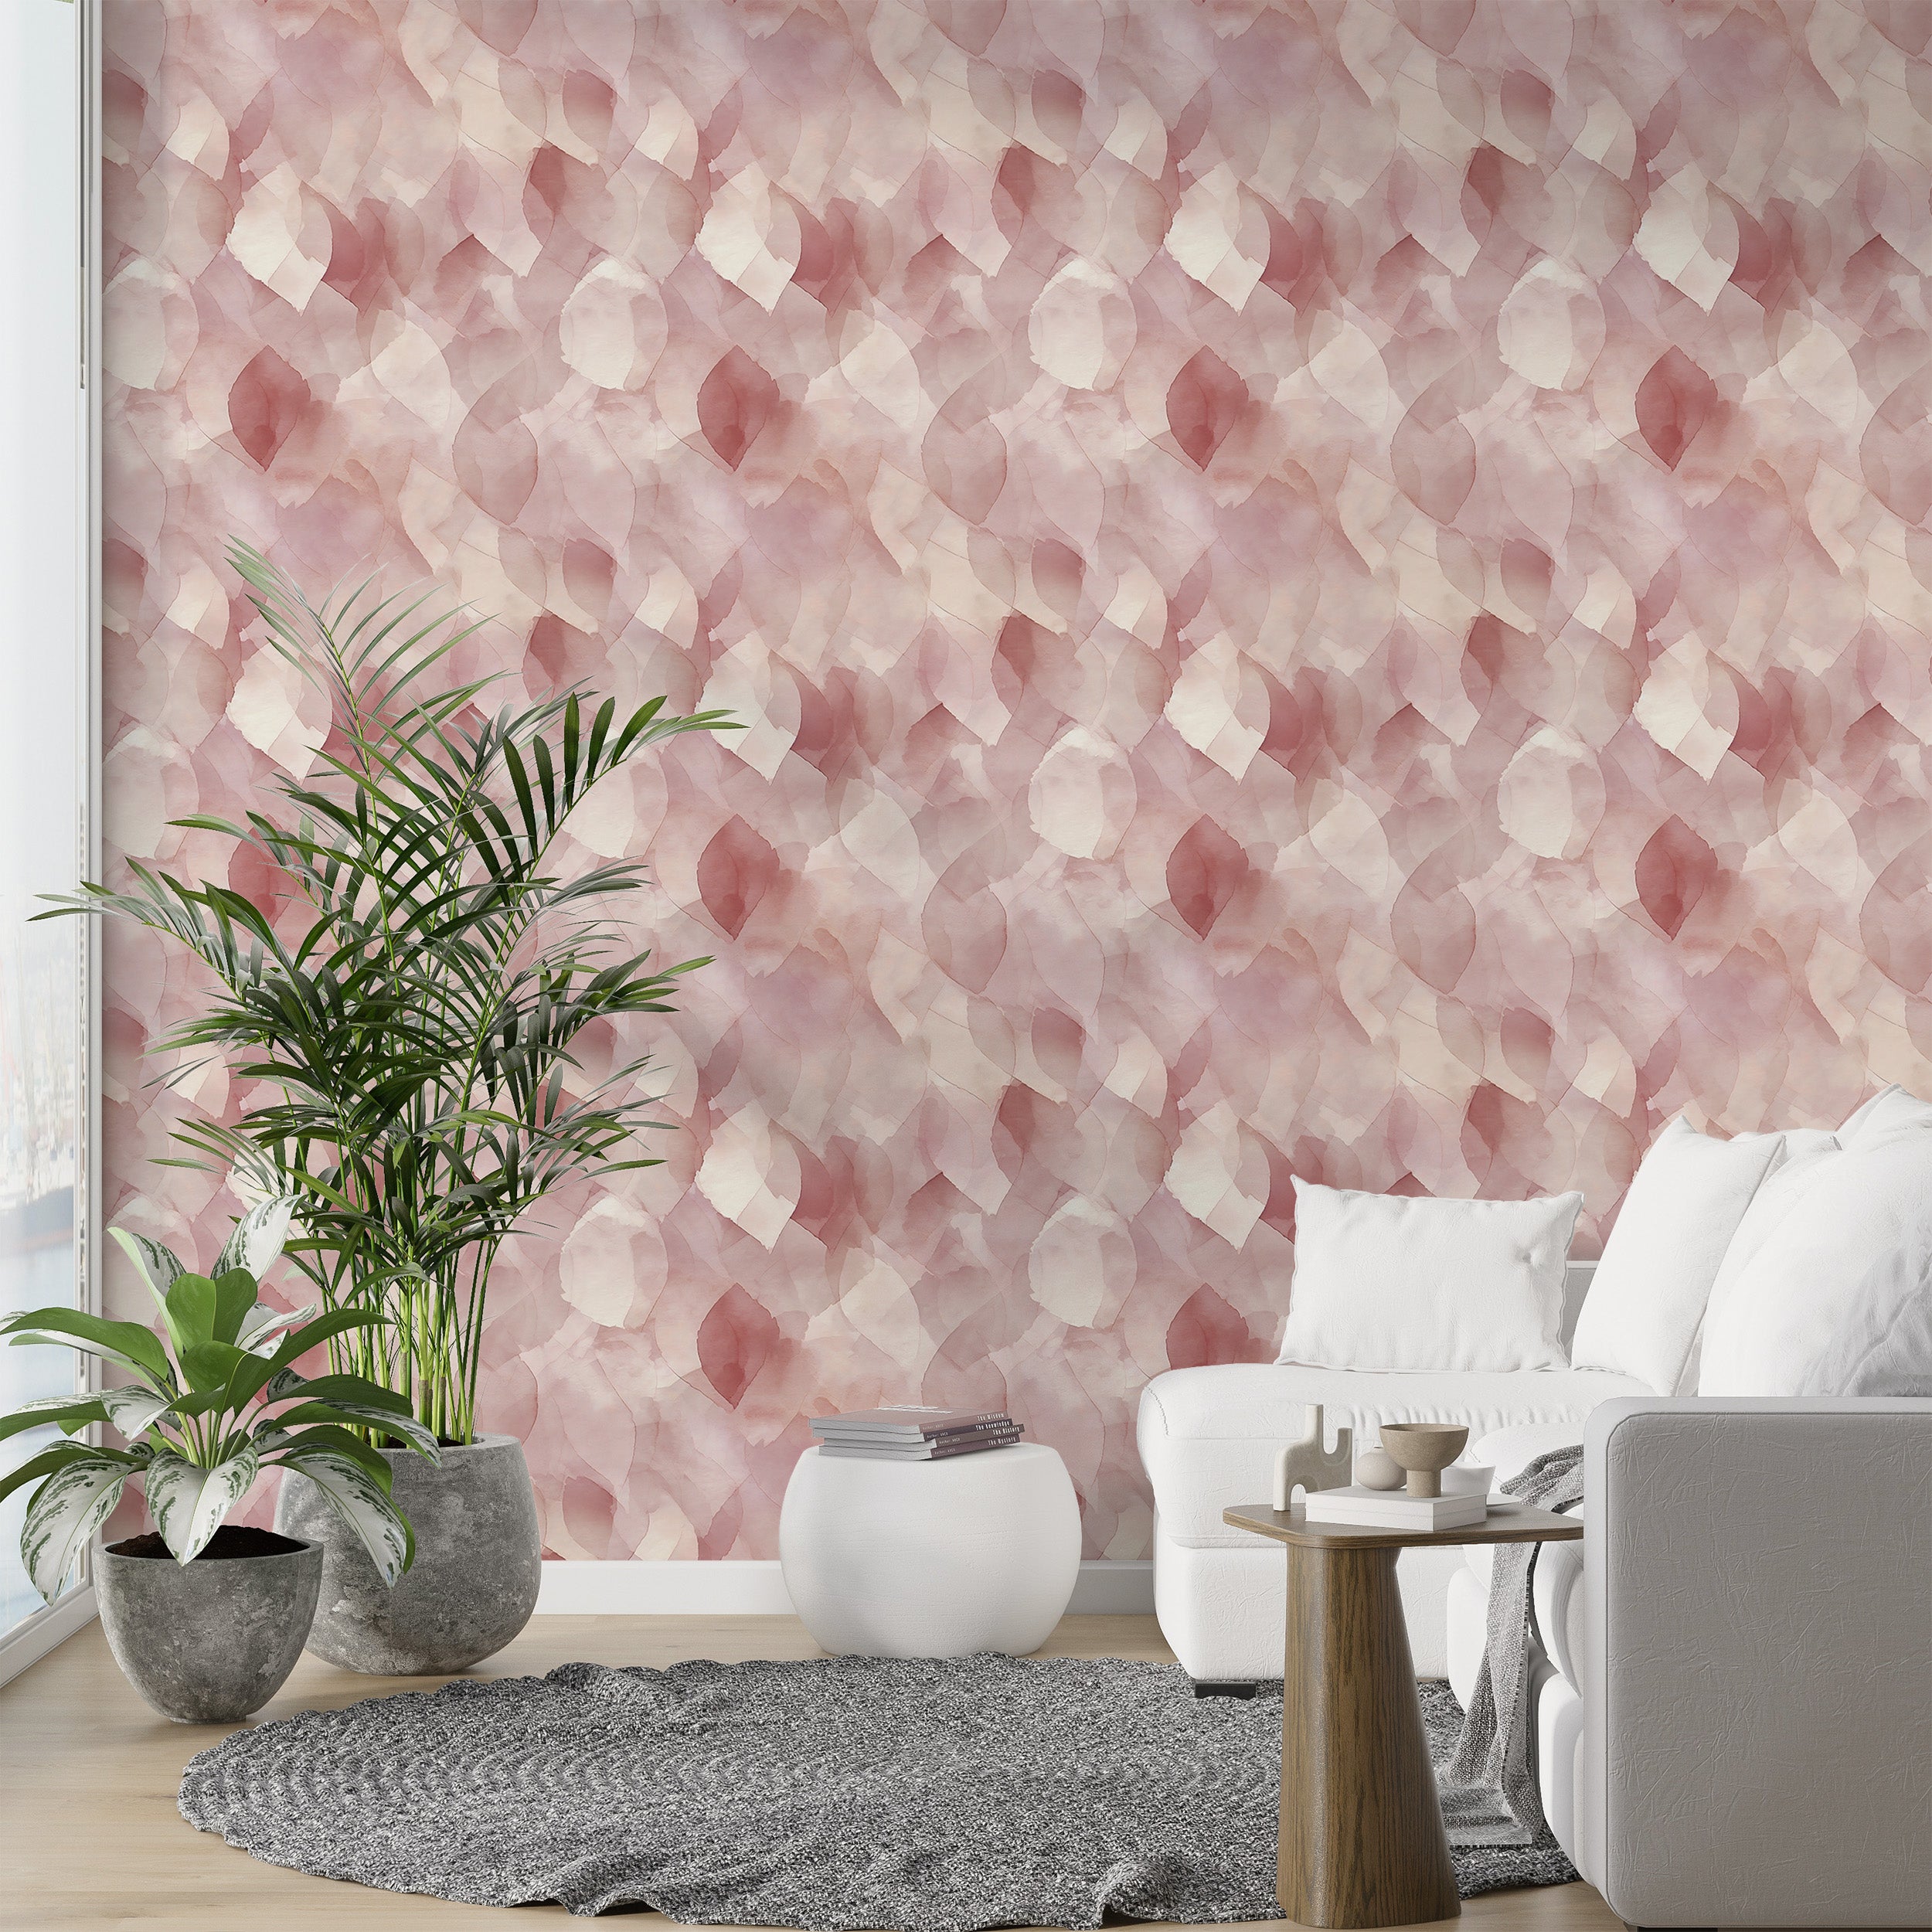 Redefine Space with Brushed Pink Wallpaper